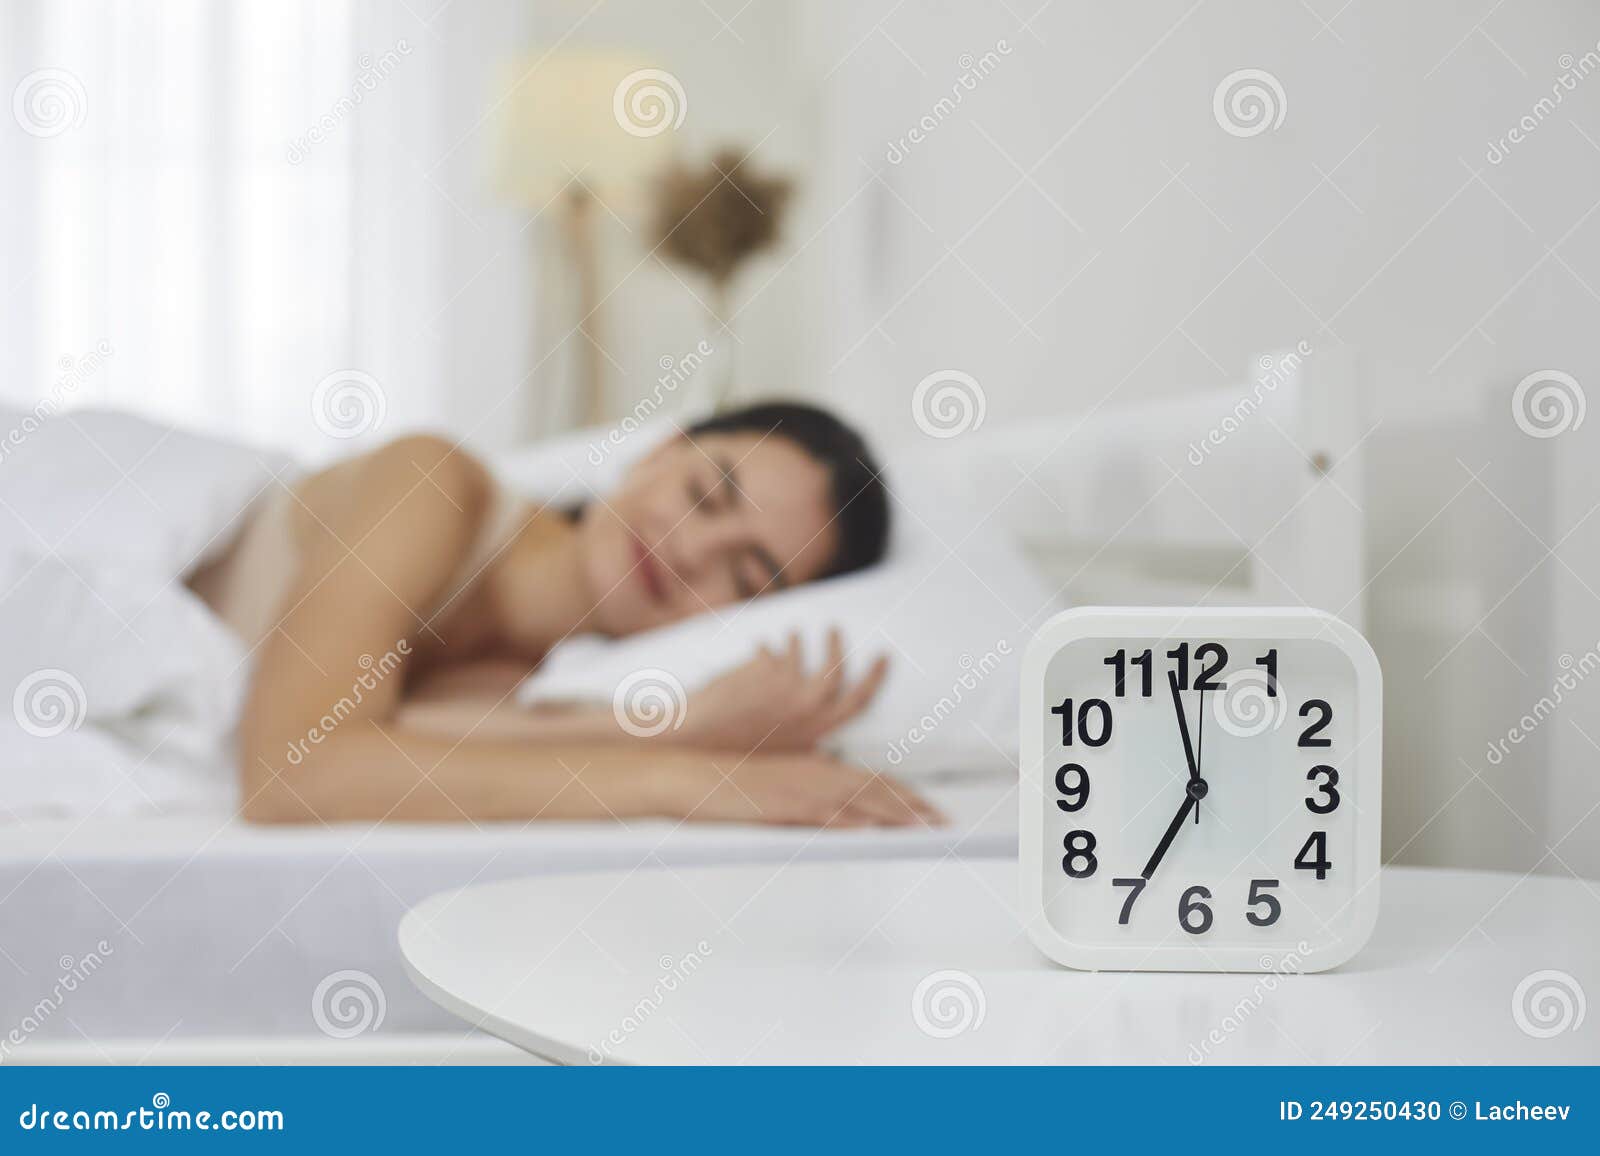 alarm clock set for 7 am on bedside table, with happy woman sleeping on bed in background